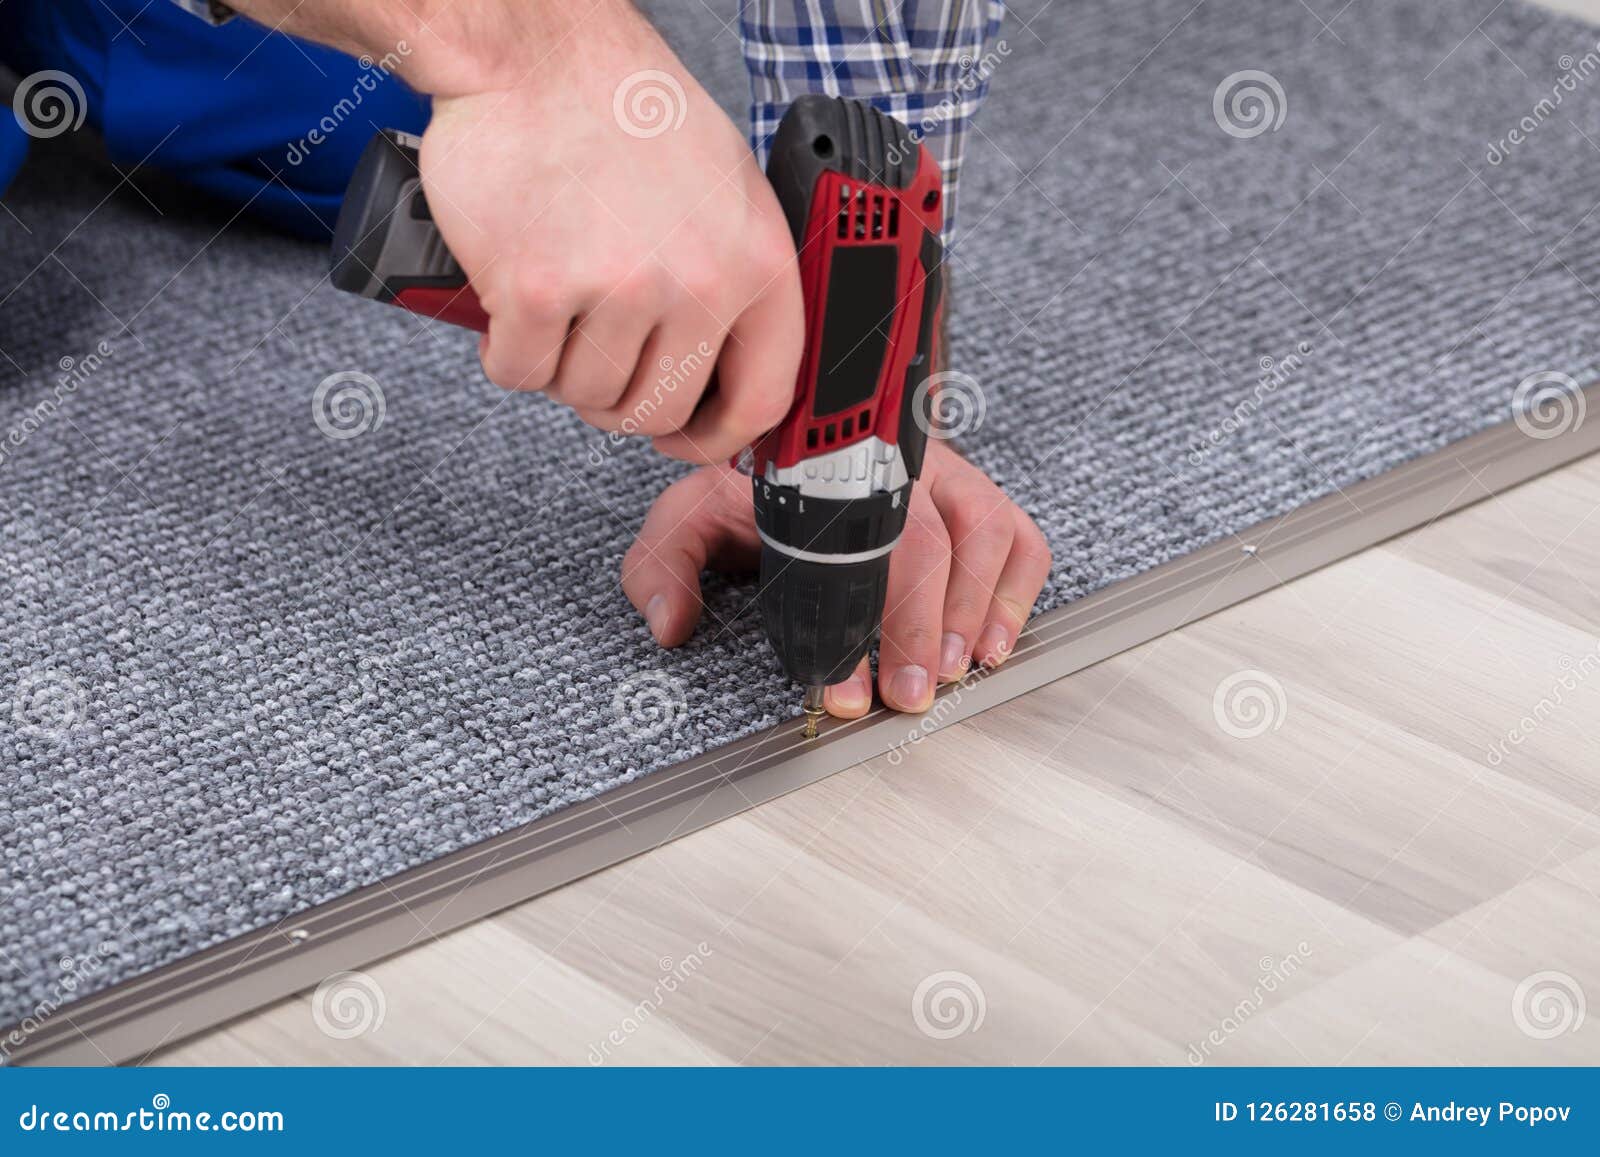 carpet fitter installing carpet with wireless screwdriver